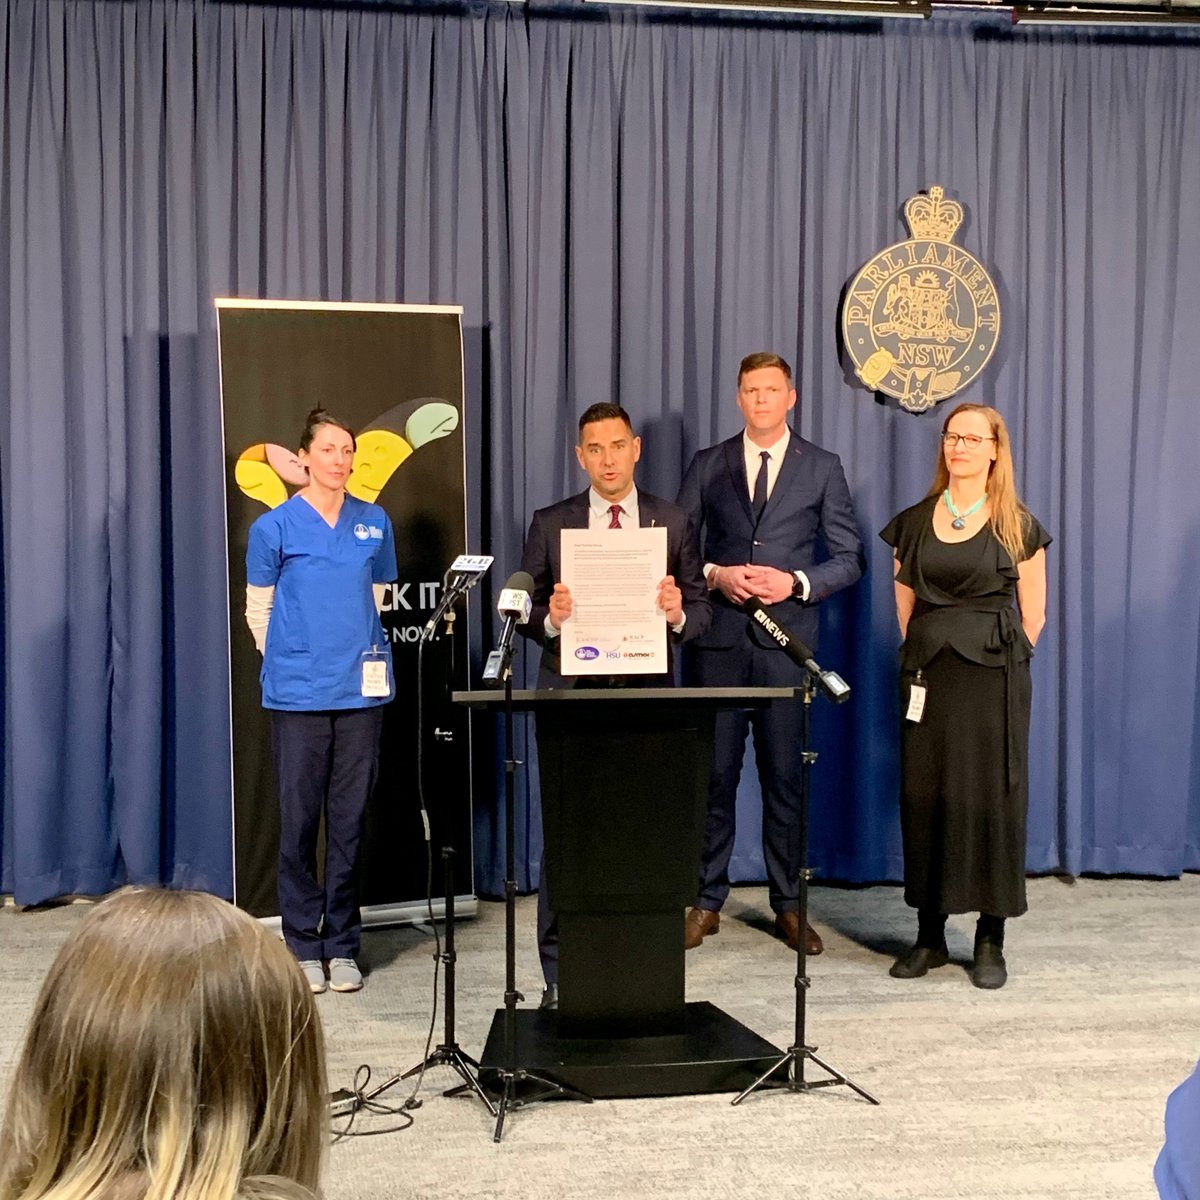 Yesterday, Unharm stood with @RACGP @nswnma @TheRACP @HSUNSW @ASMOFnsw and @AlexGreenwich to call on @ChrisMinnsMP to get drug checking up and running this summer. Drug checking is proven + effective. Delaying is putting lives at risk.